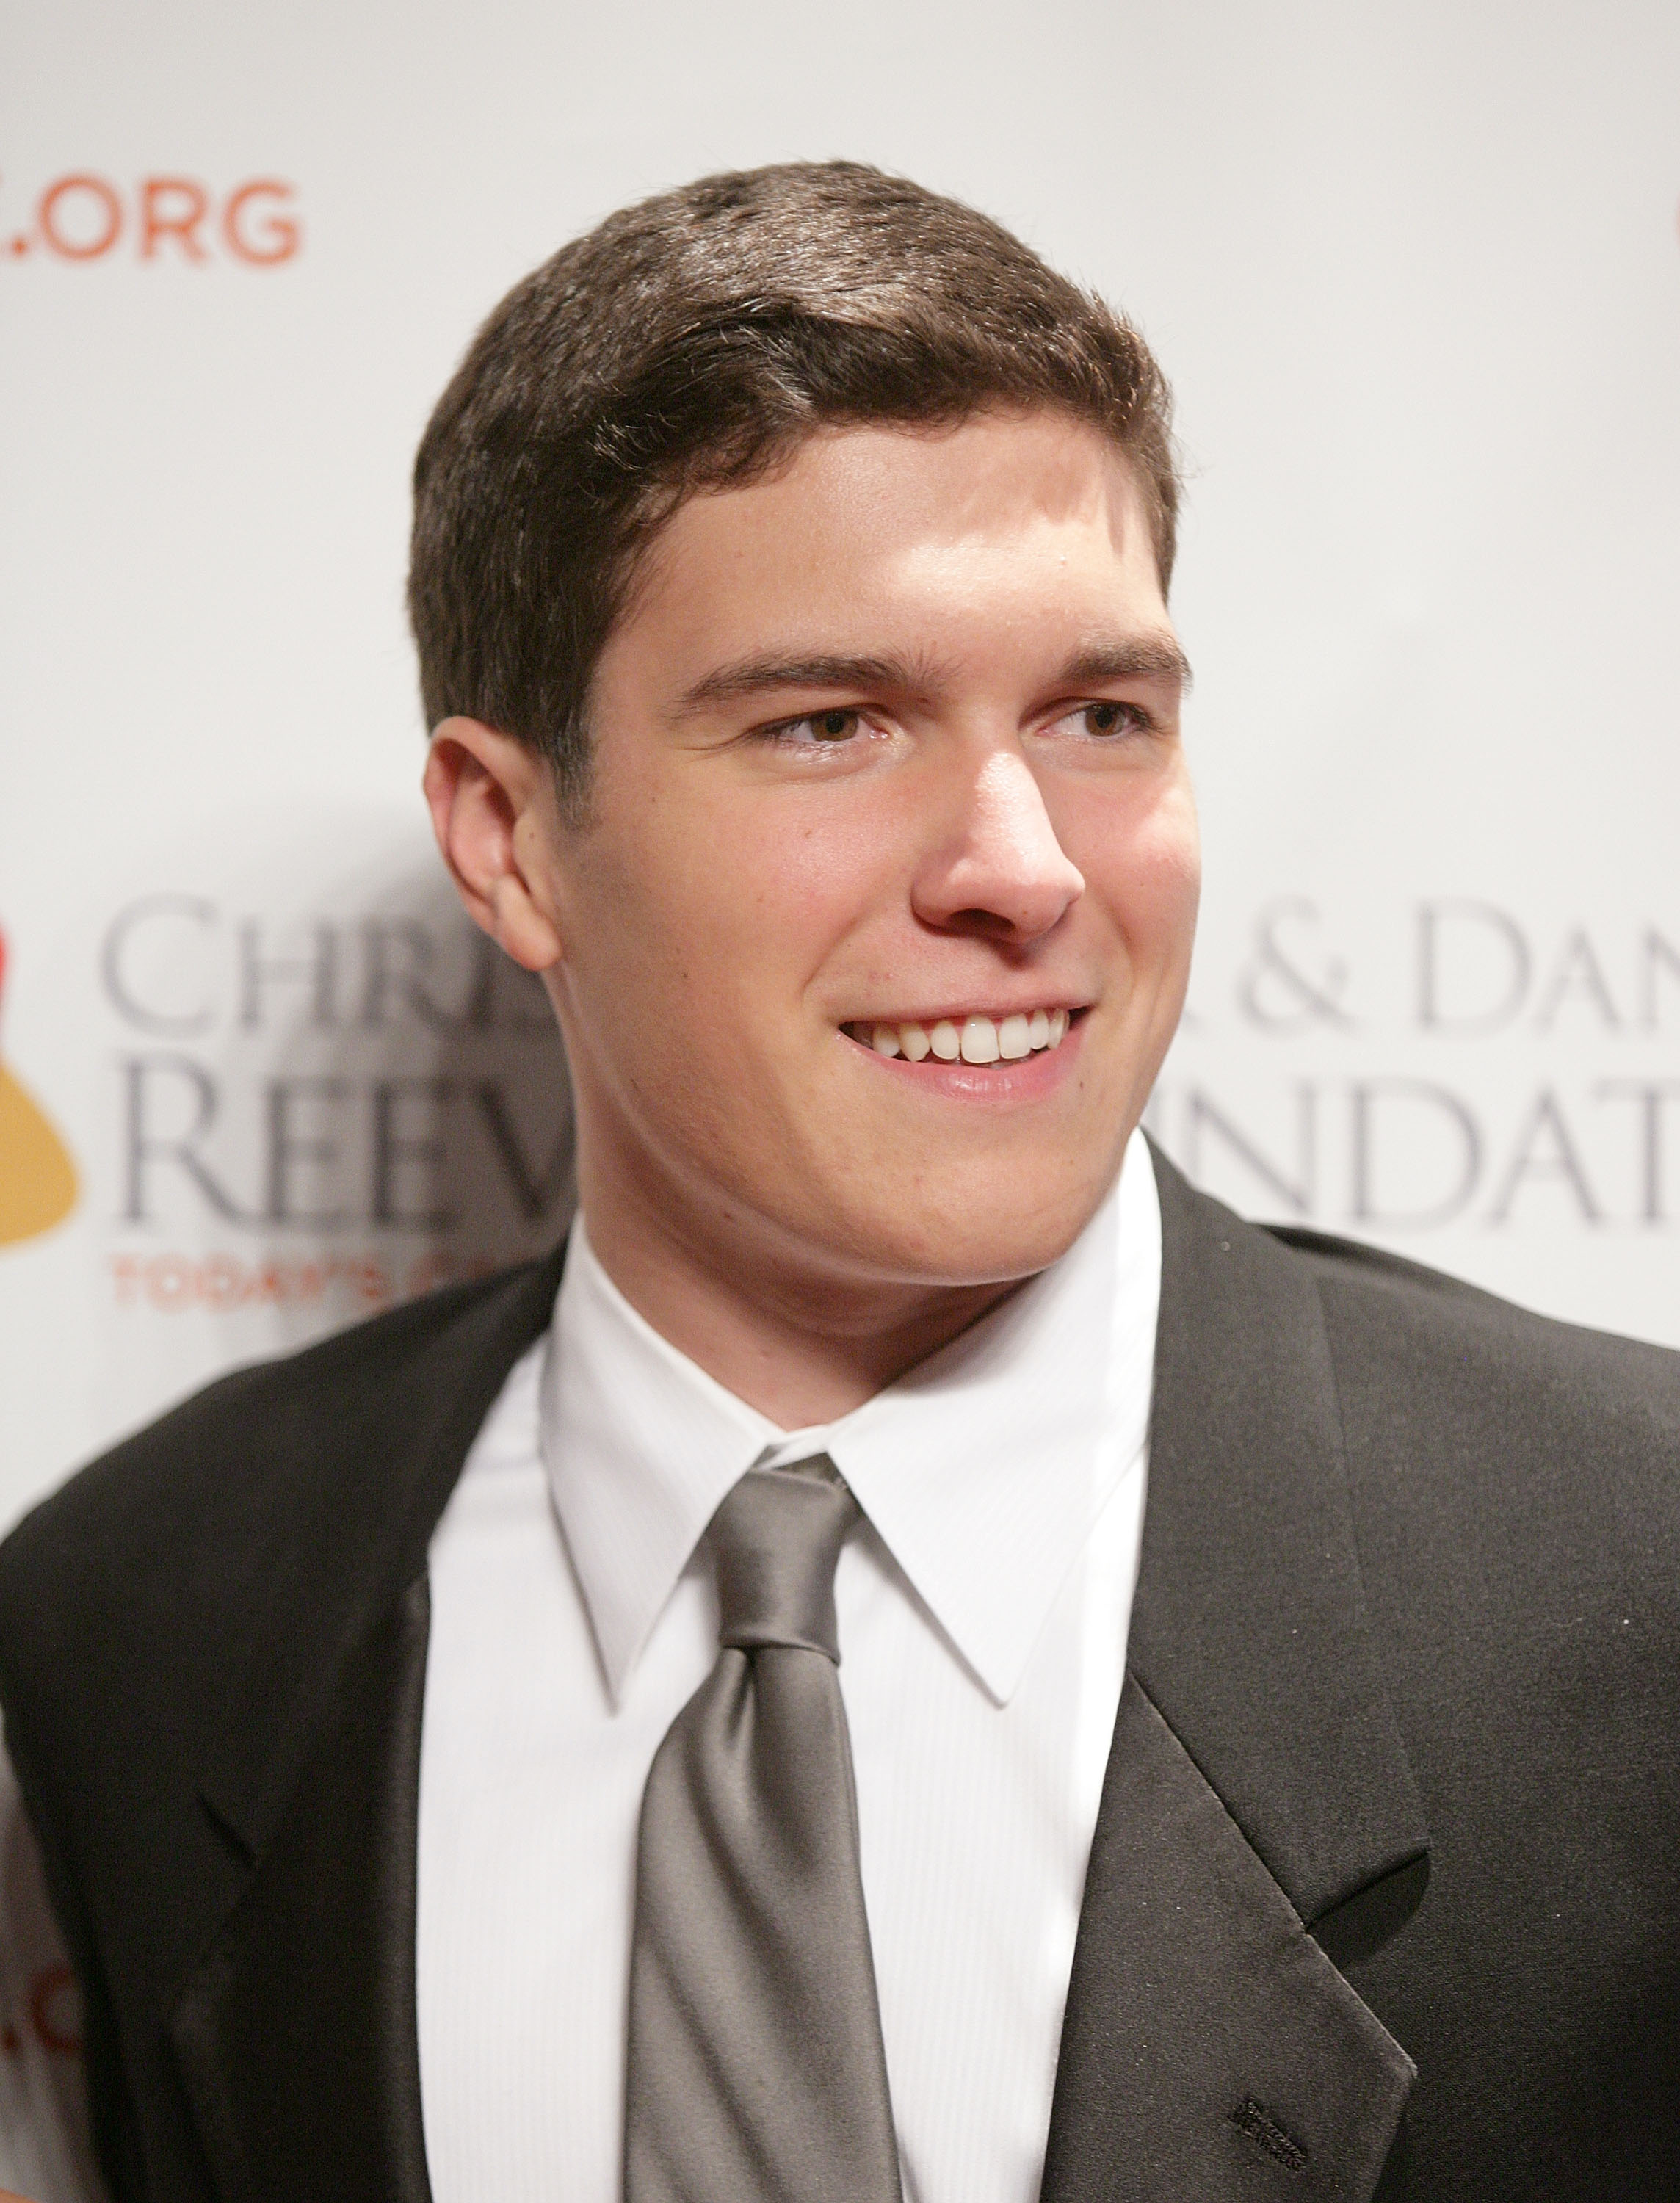 Will Reeve besucht die Christopher &amp; Dana Reeve Foundation's A Magical Evening 2011 Benefizveranstaltung im Cipriani, Wall Street am 30. November 2011 in New York City | Quelle: Getty Images